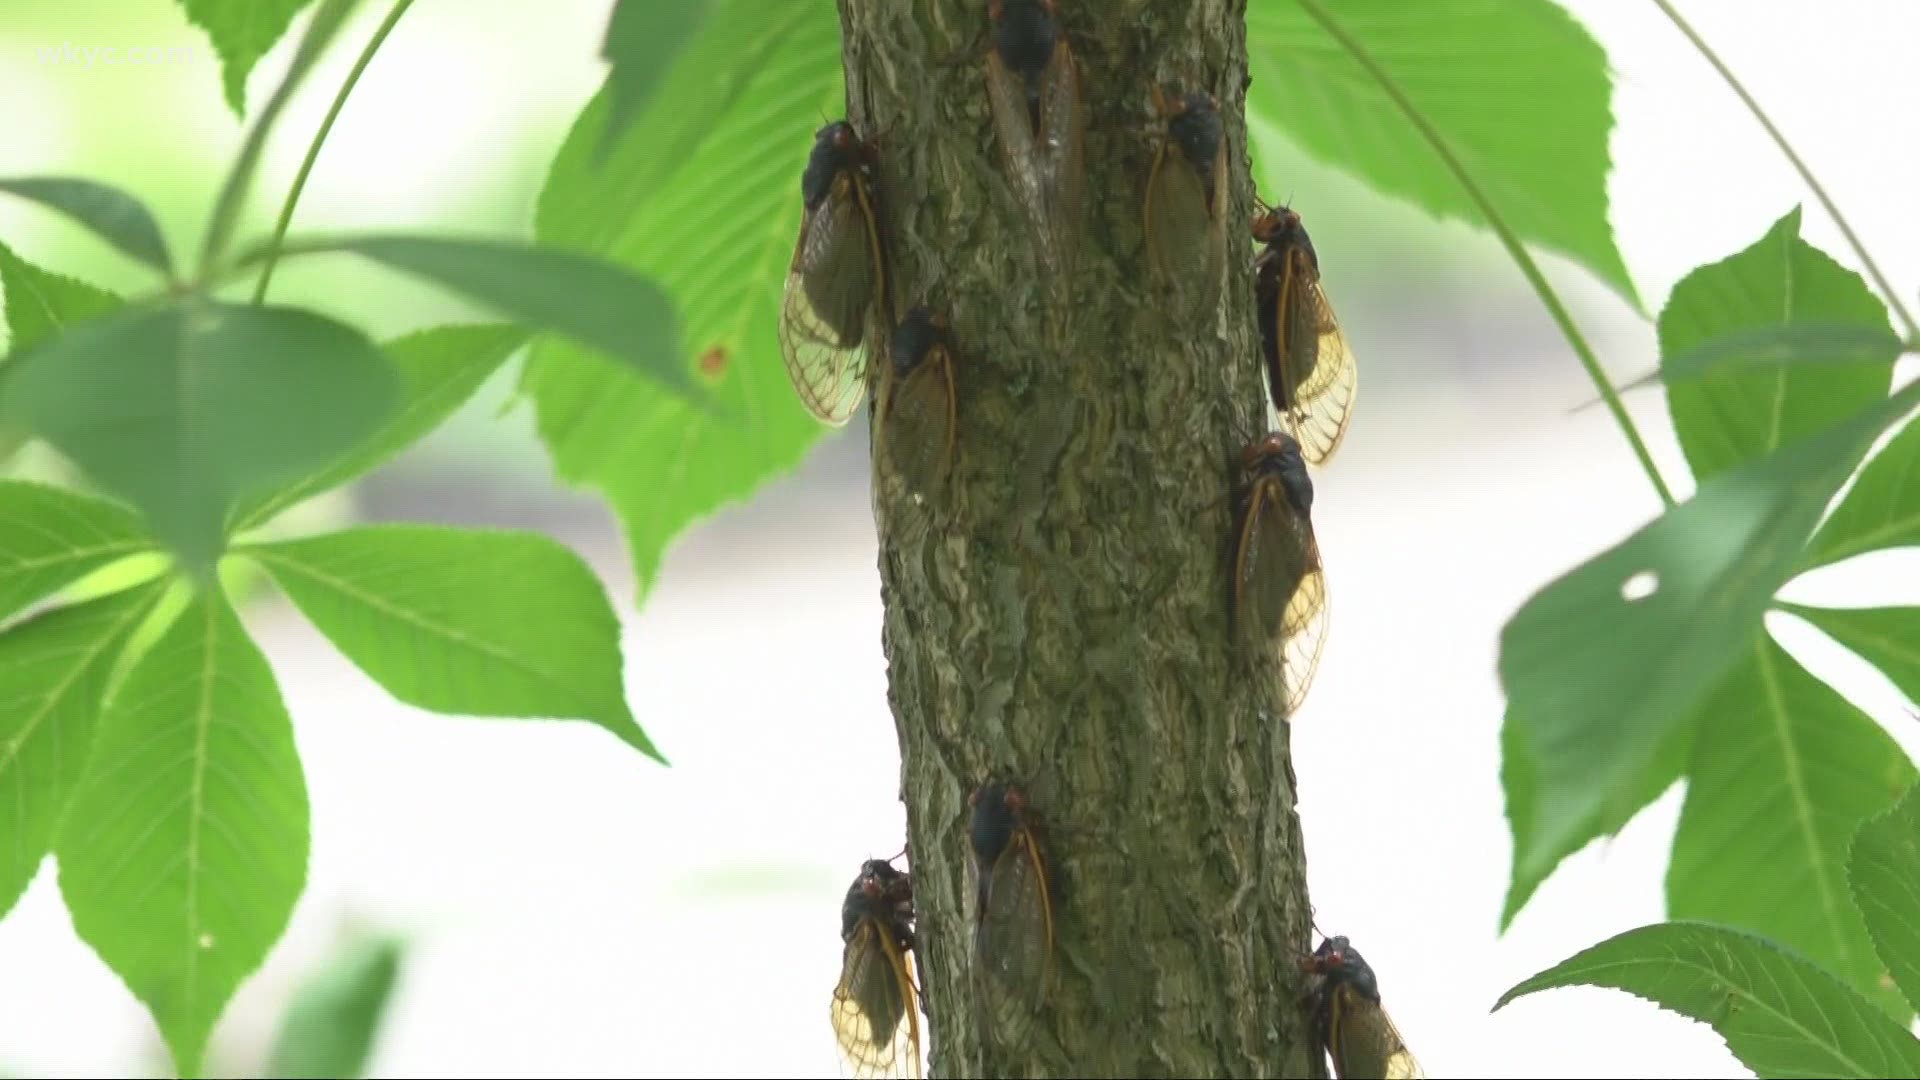 After a 17-year hiatus, Cicadas are back. Mike Polk Jr. visited Columbus, where they appear to be taking over.